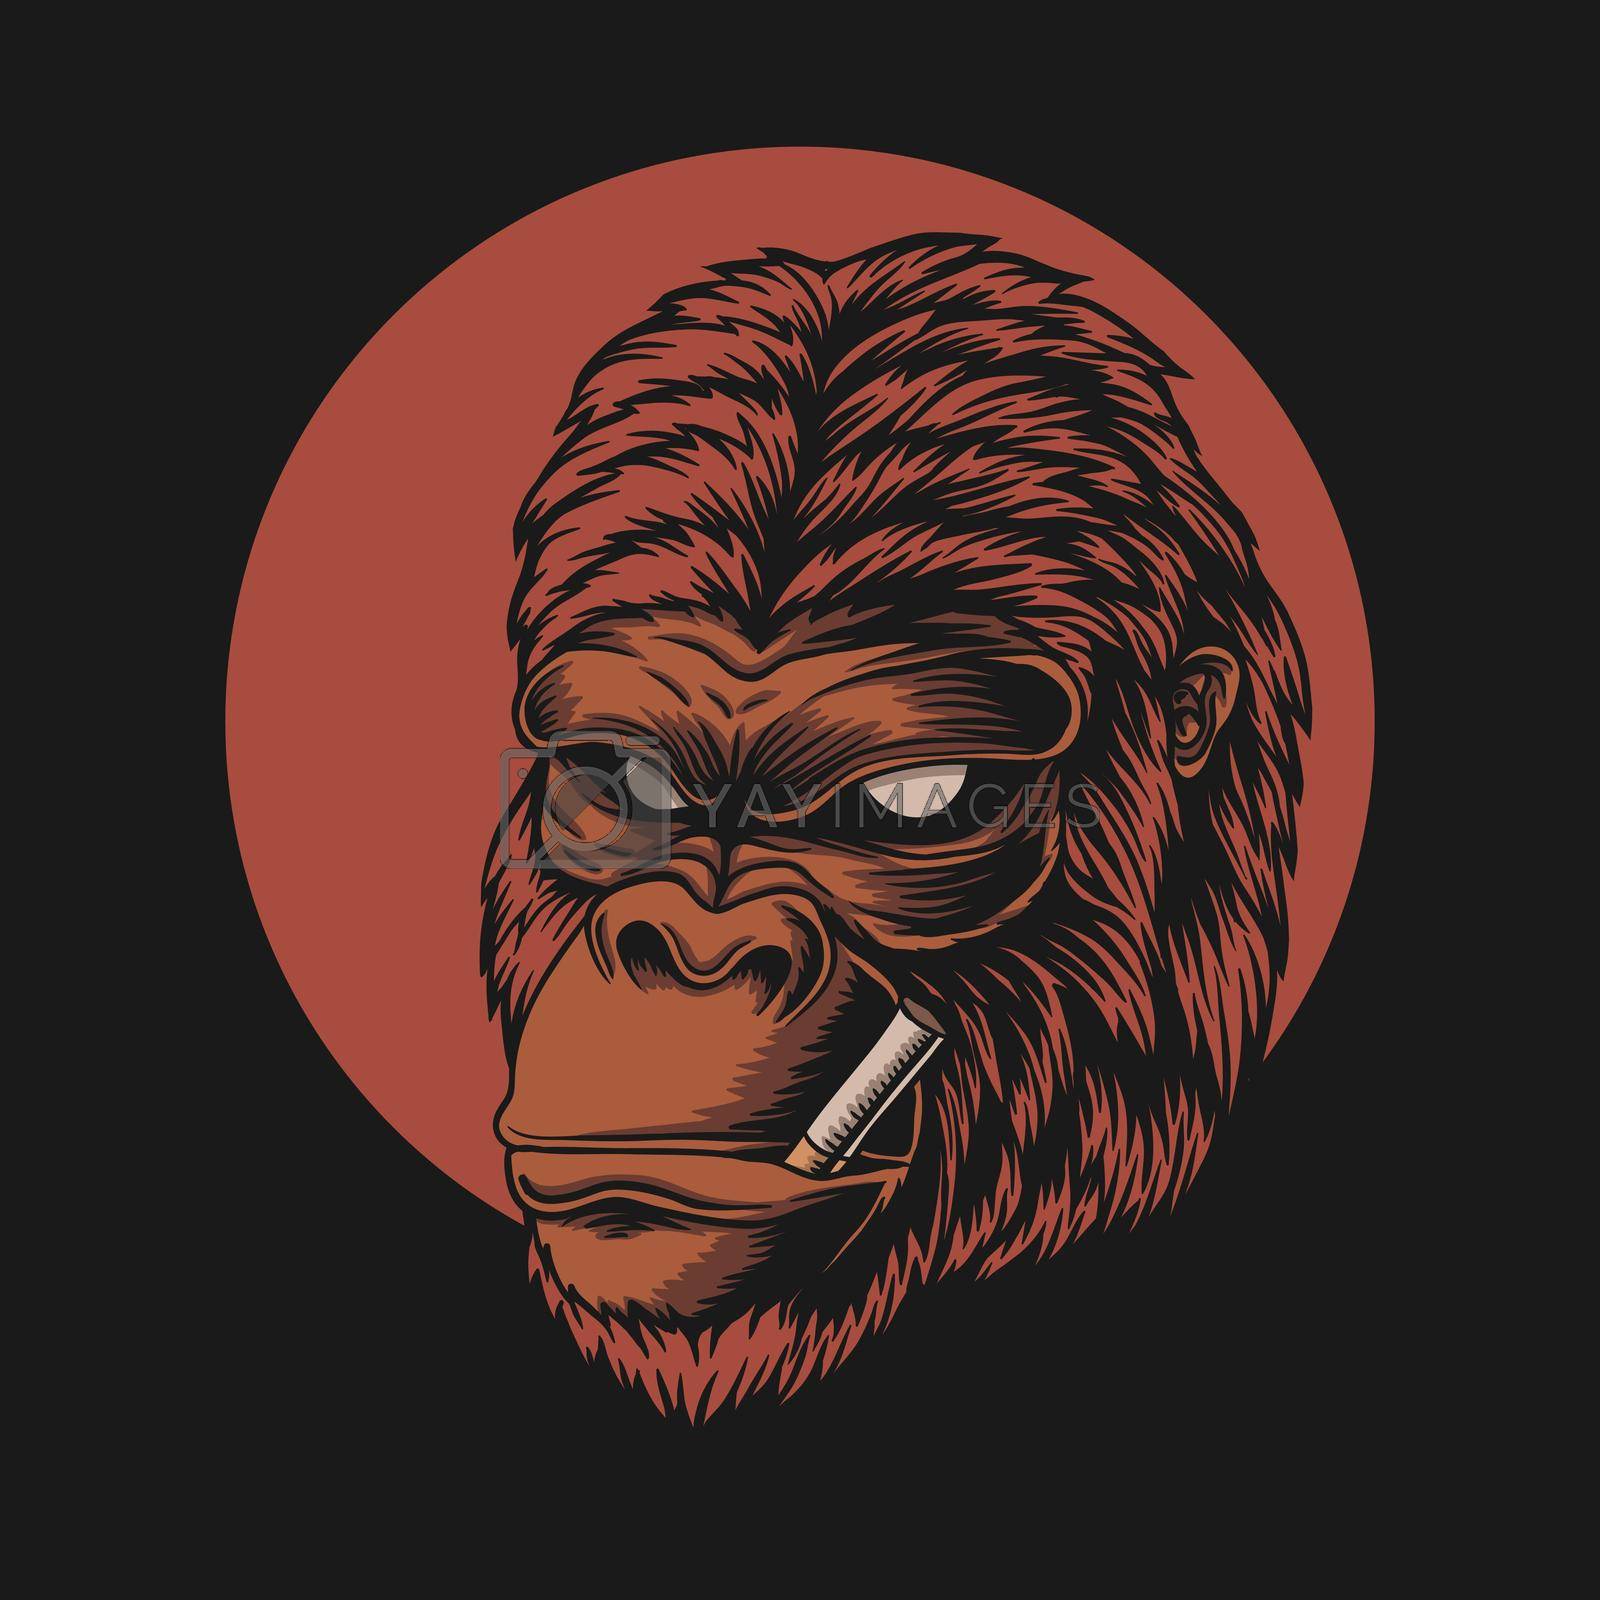 Royalty free image of Gorilla head smoke vector illustration by andypp